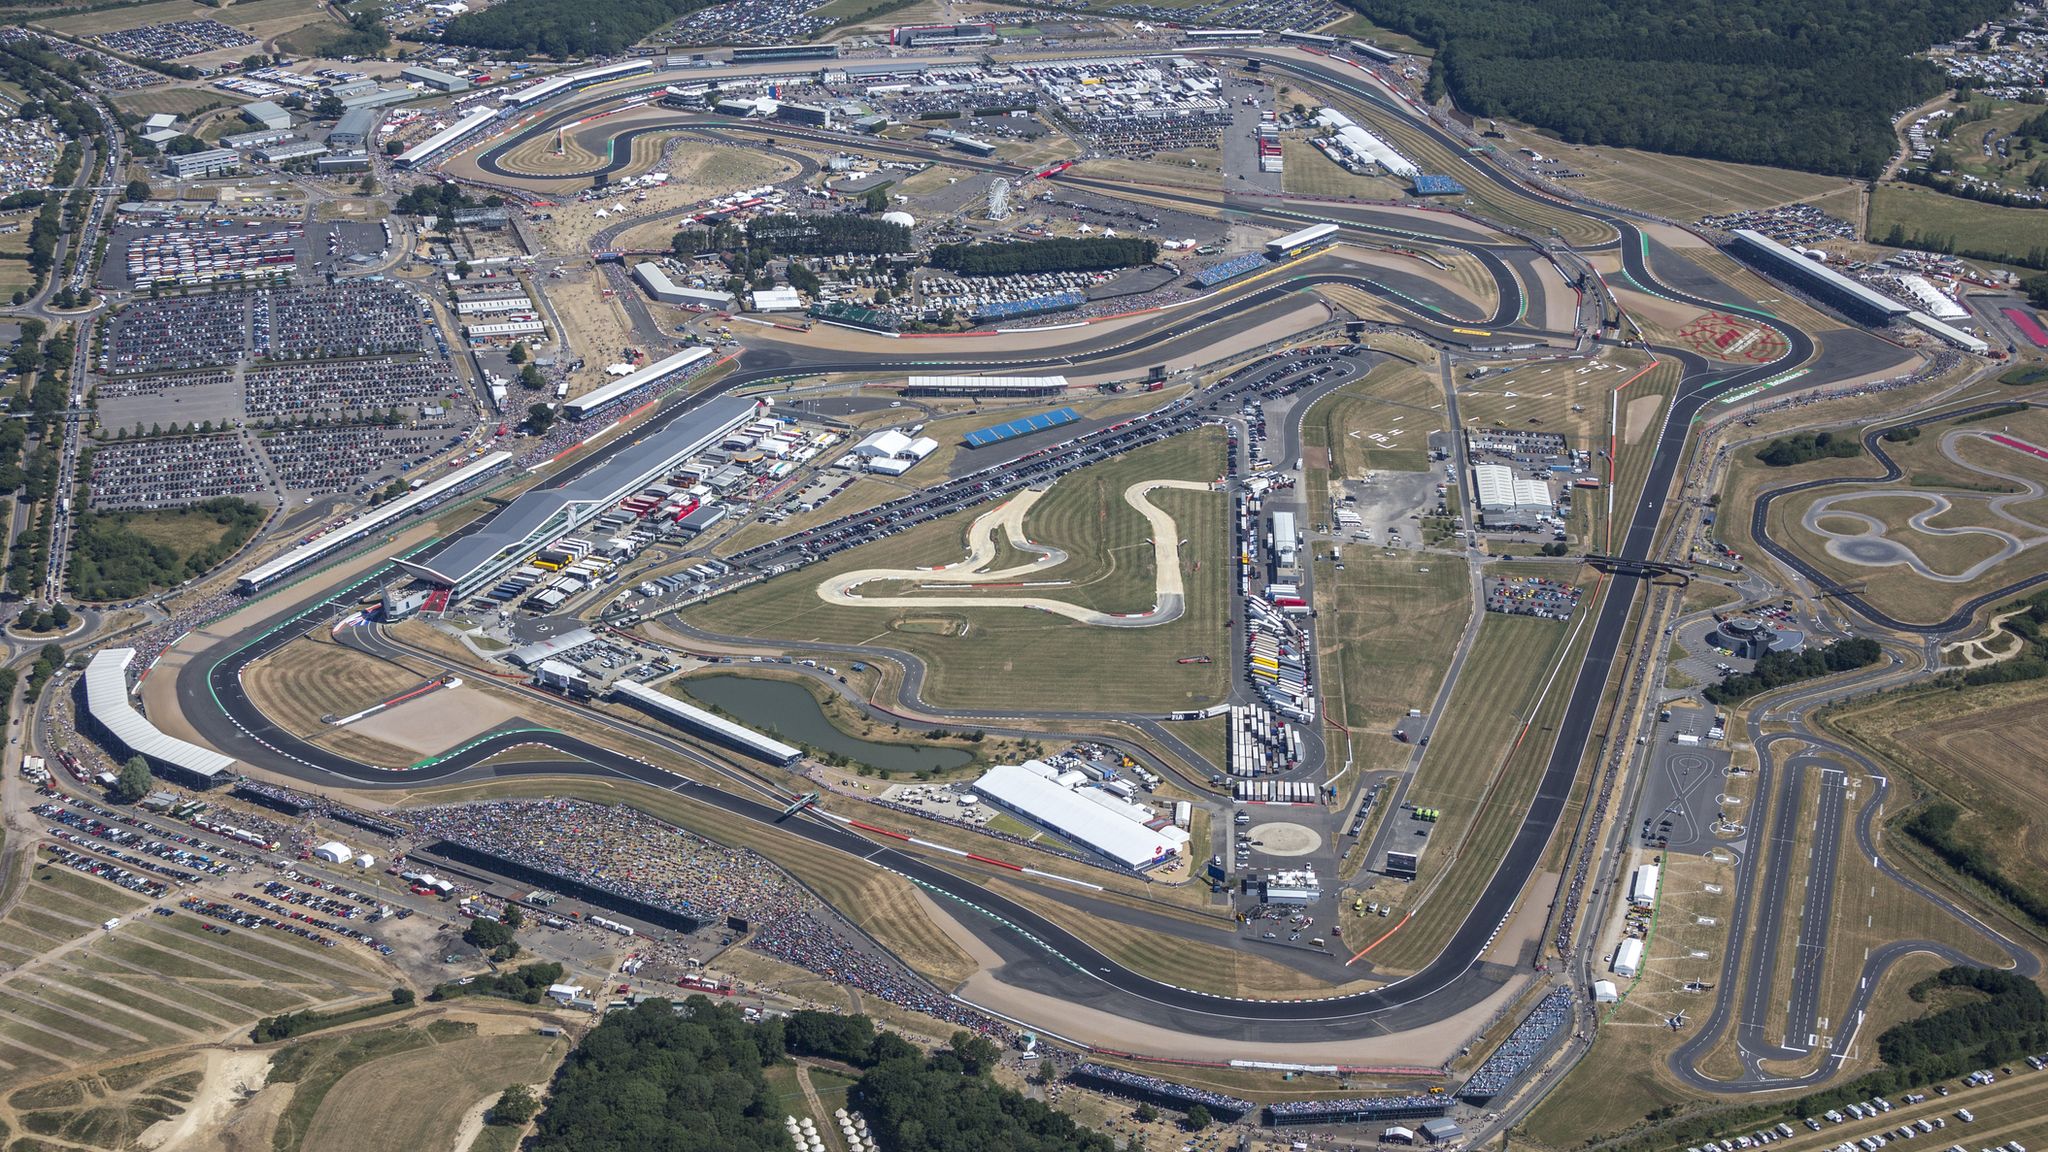 Aerial photo of the Silverstone F1 circuit